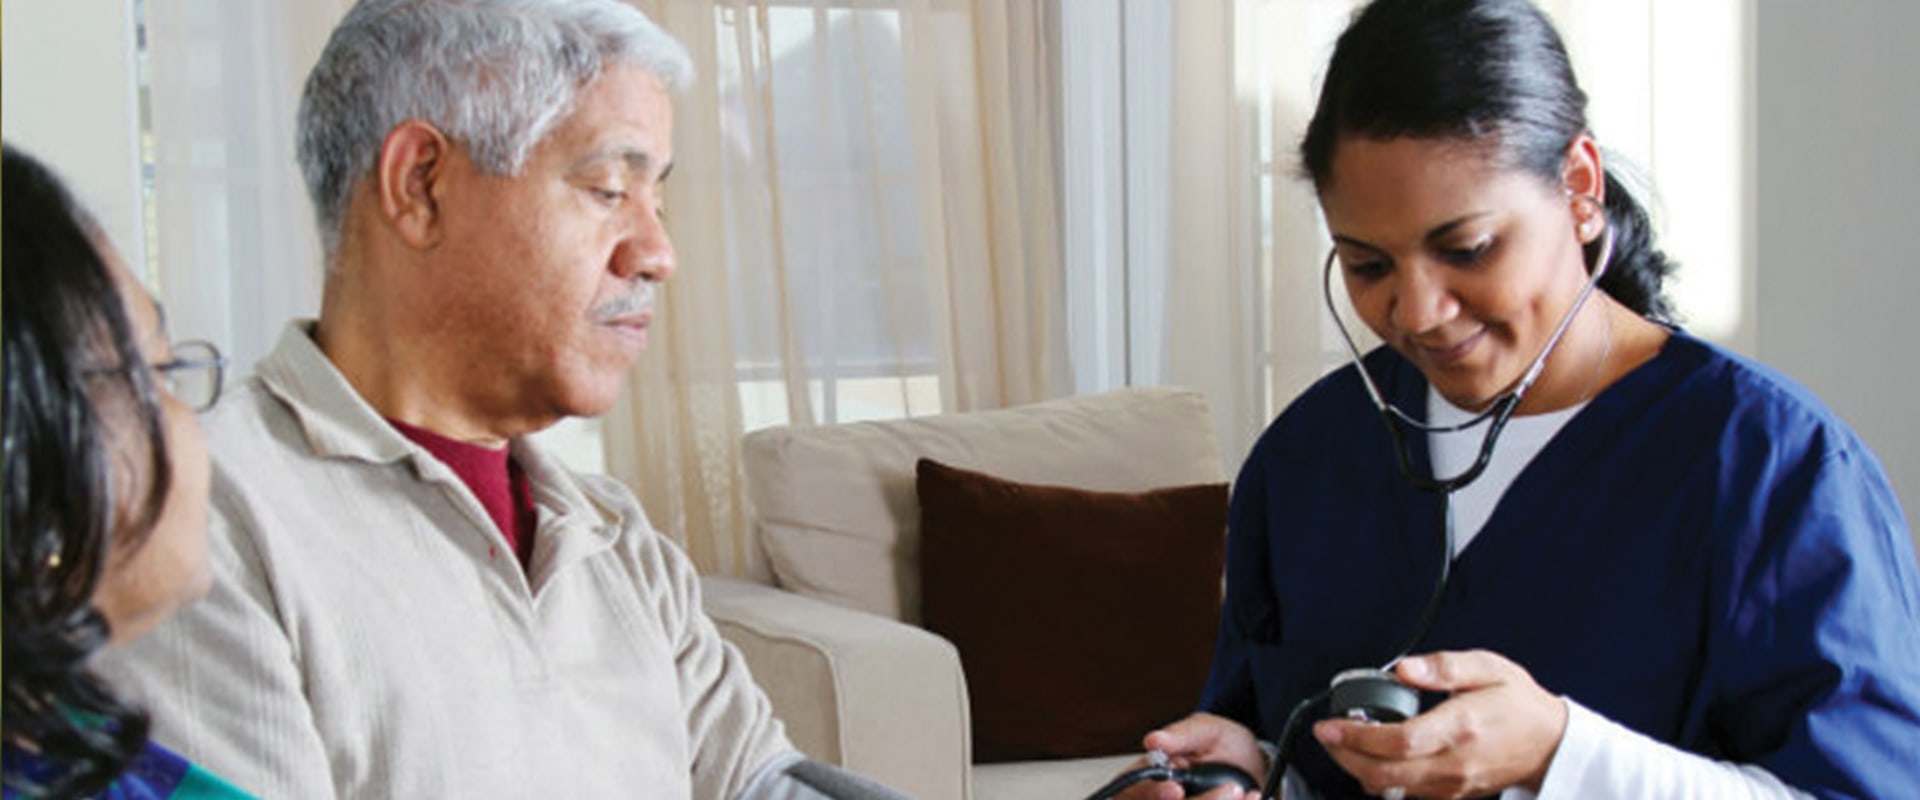 How to Achieve Greater Peace of Mind for Family Members Through In-Home Care Services